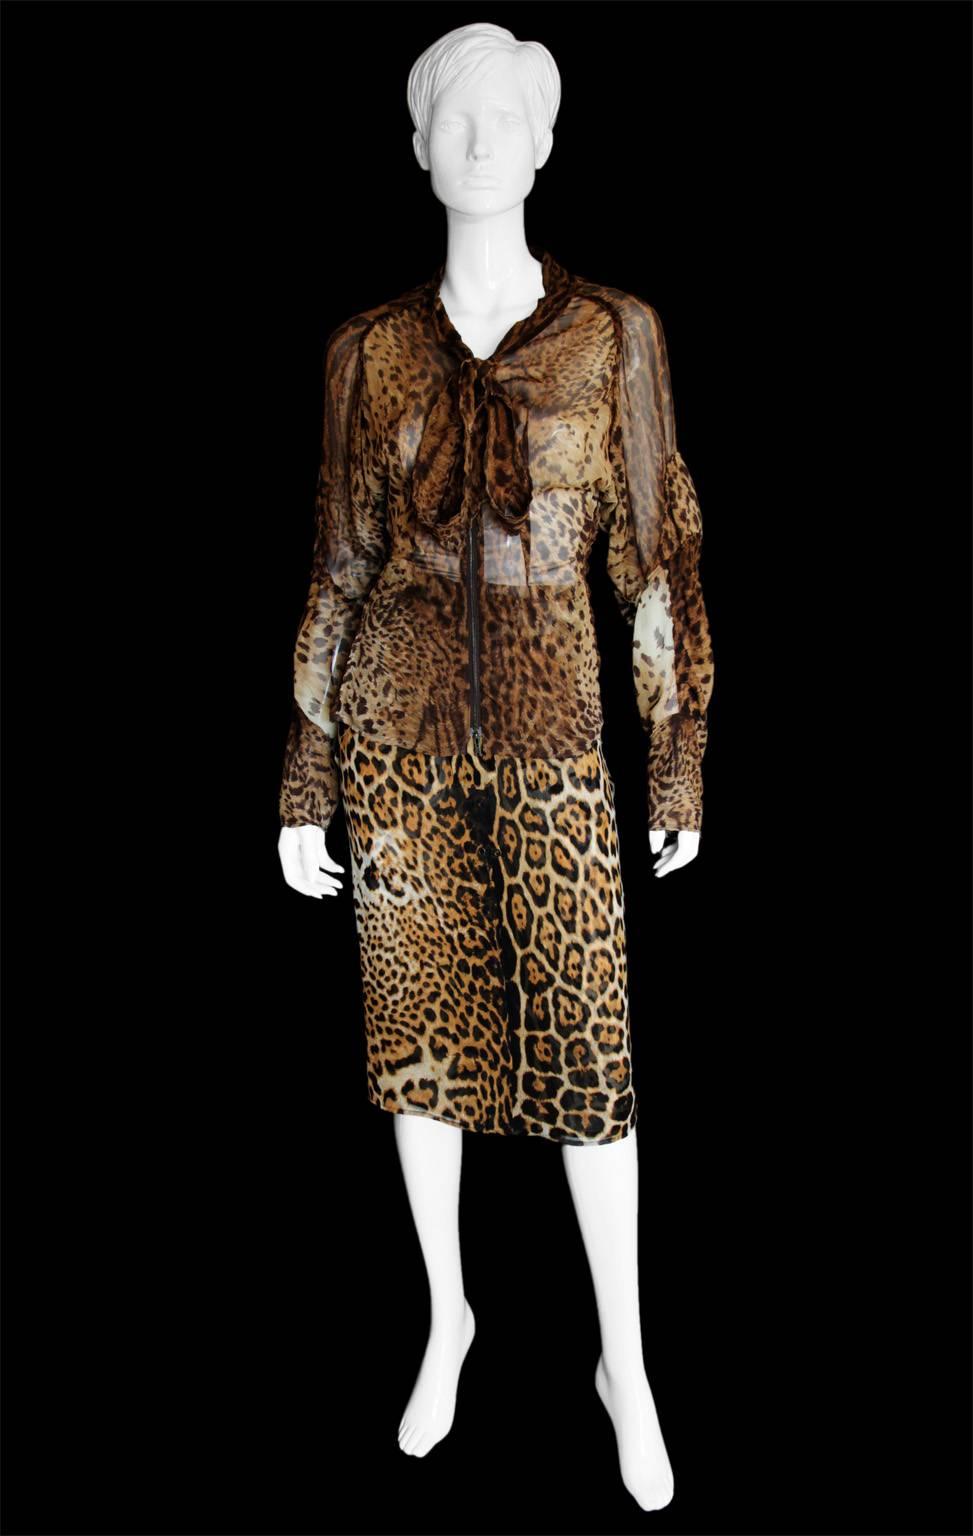 Rare & Iconic Tom Ford For YSL Rive Gauche Spring Summer 2002 Silk Safari Collection Runway Blouse & Skirt!

Iconic silk chiffon blouse & matching skirt from Tom Ford's acclaimed Spring/Summer 2002 Safari/Mombasa Runway Collection for YSL Rive